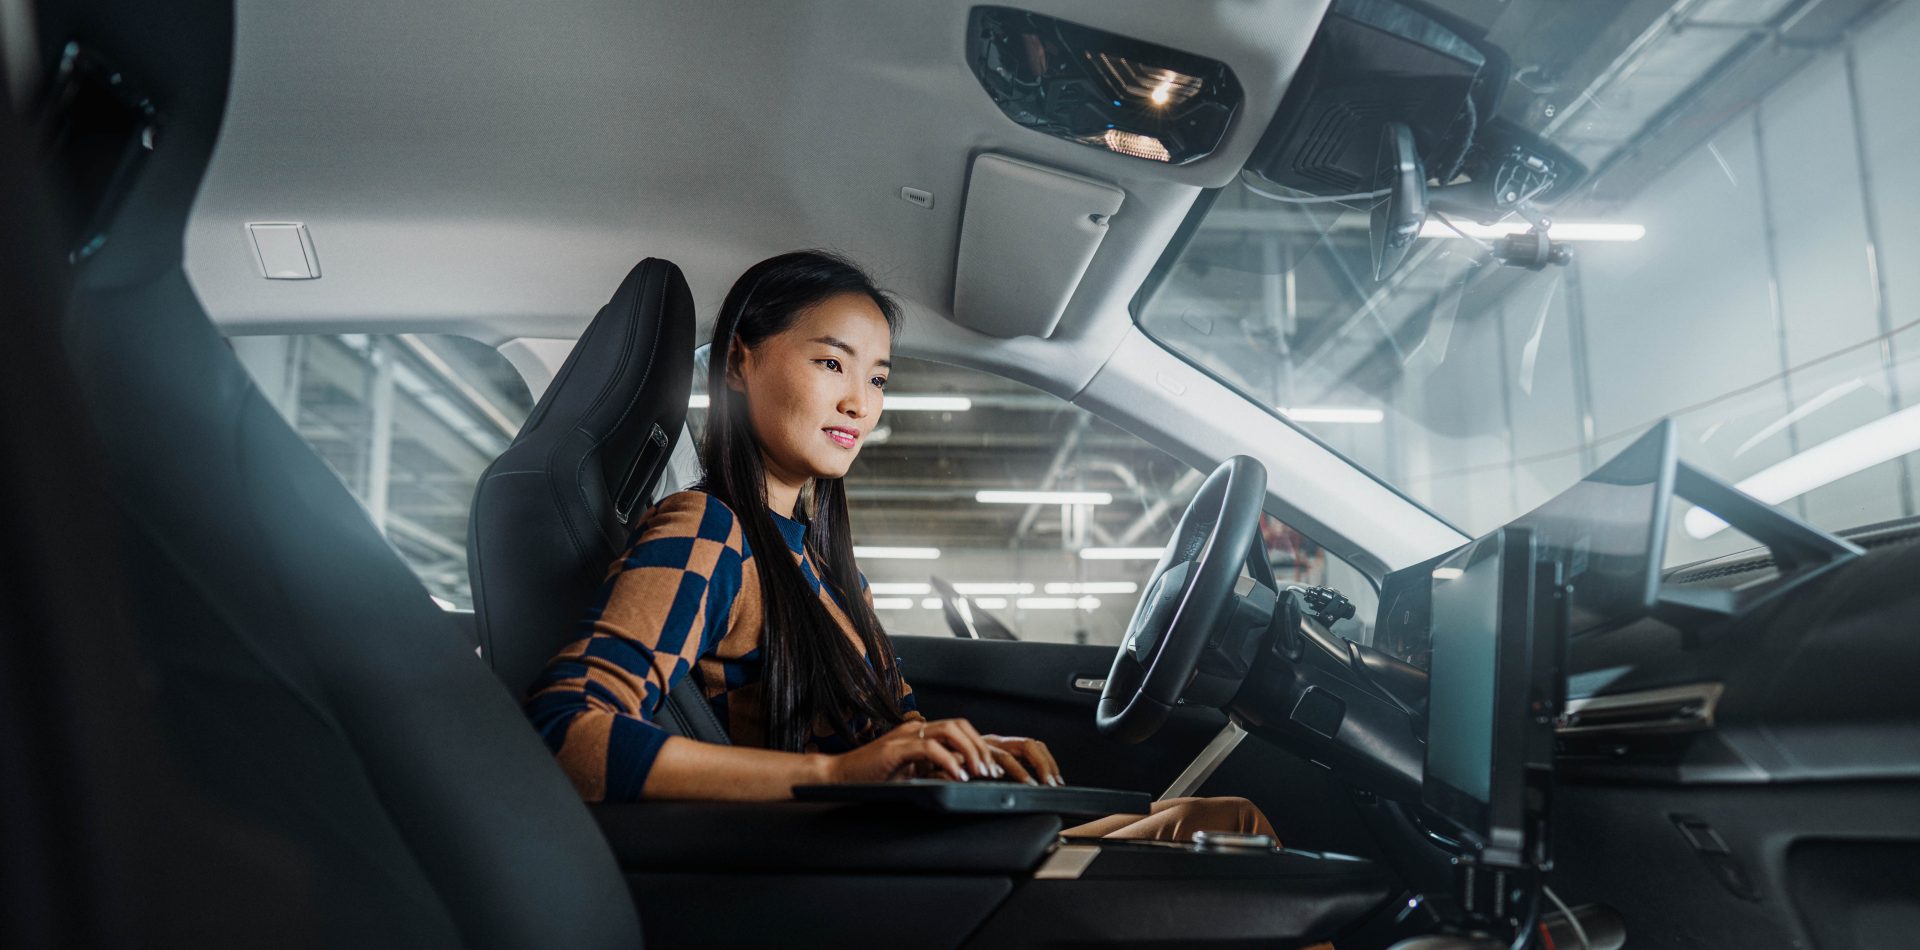 The picture shows a BMW employee working in Software Development checking a car with her laptop.